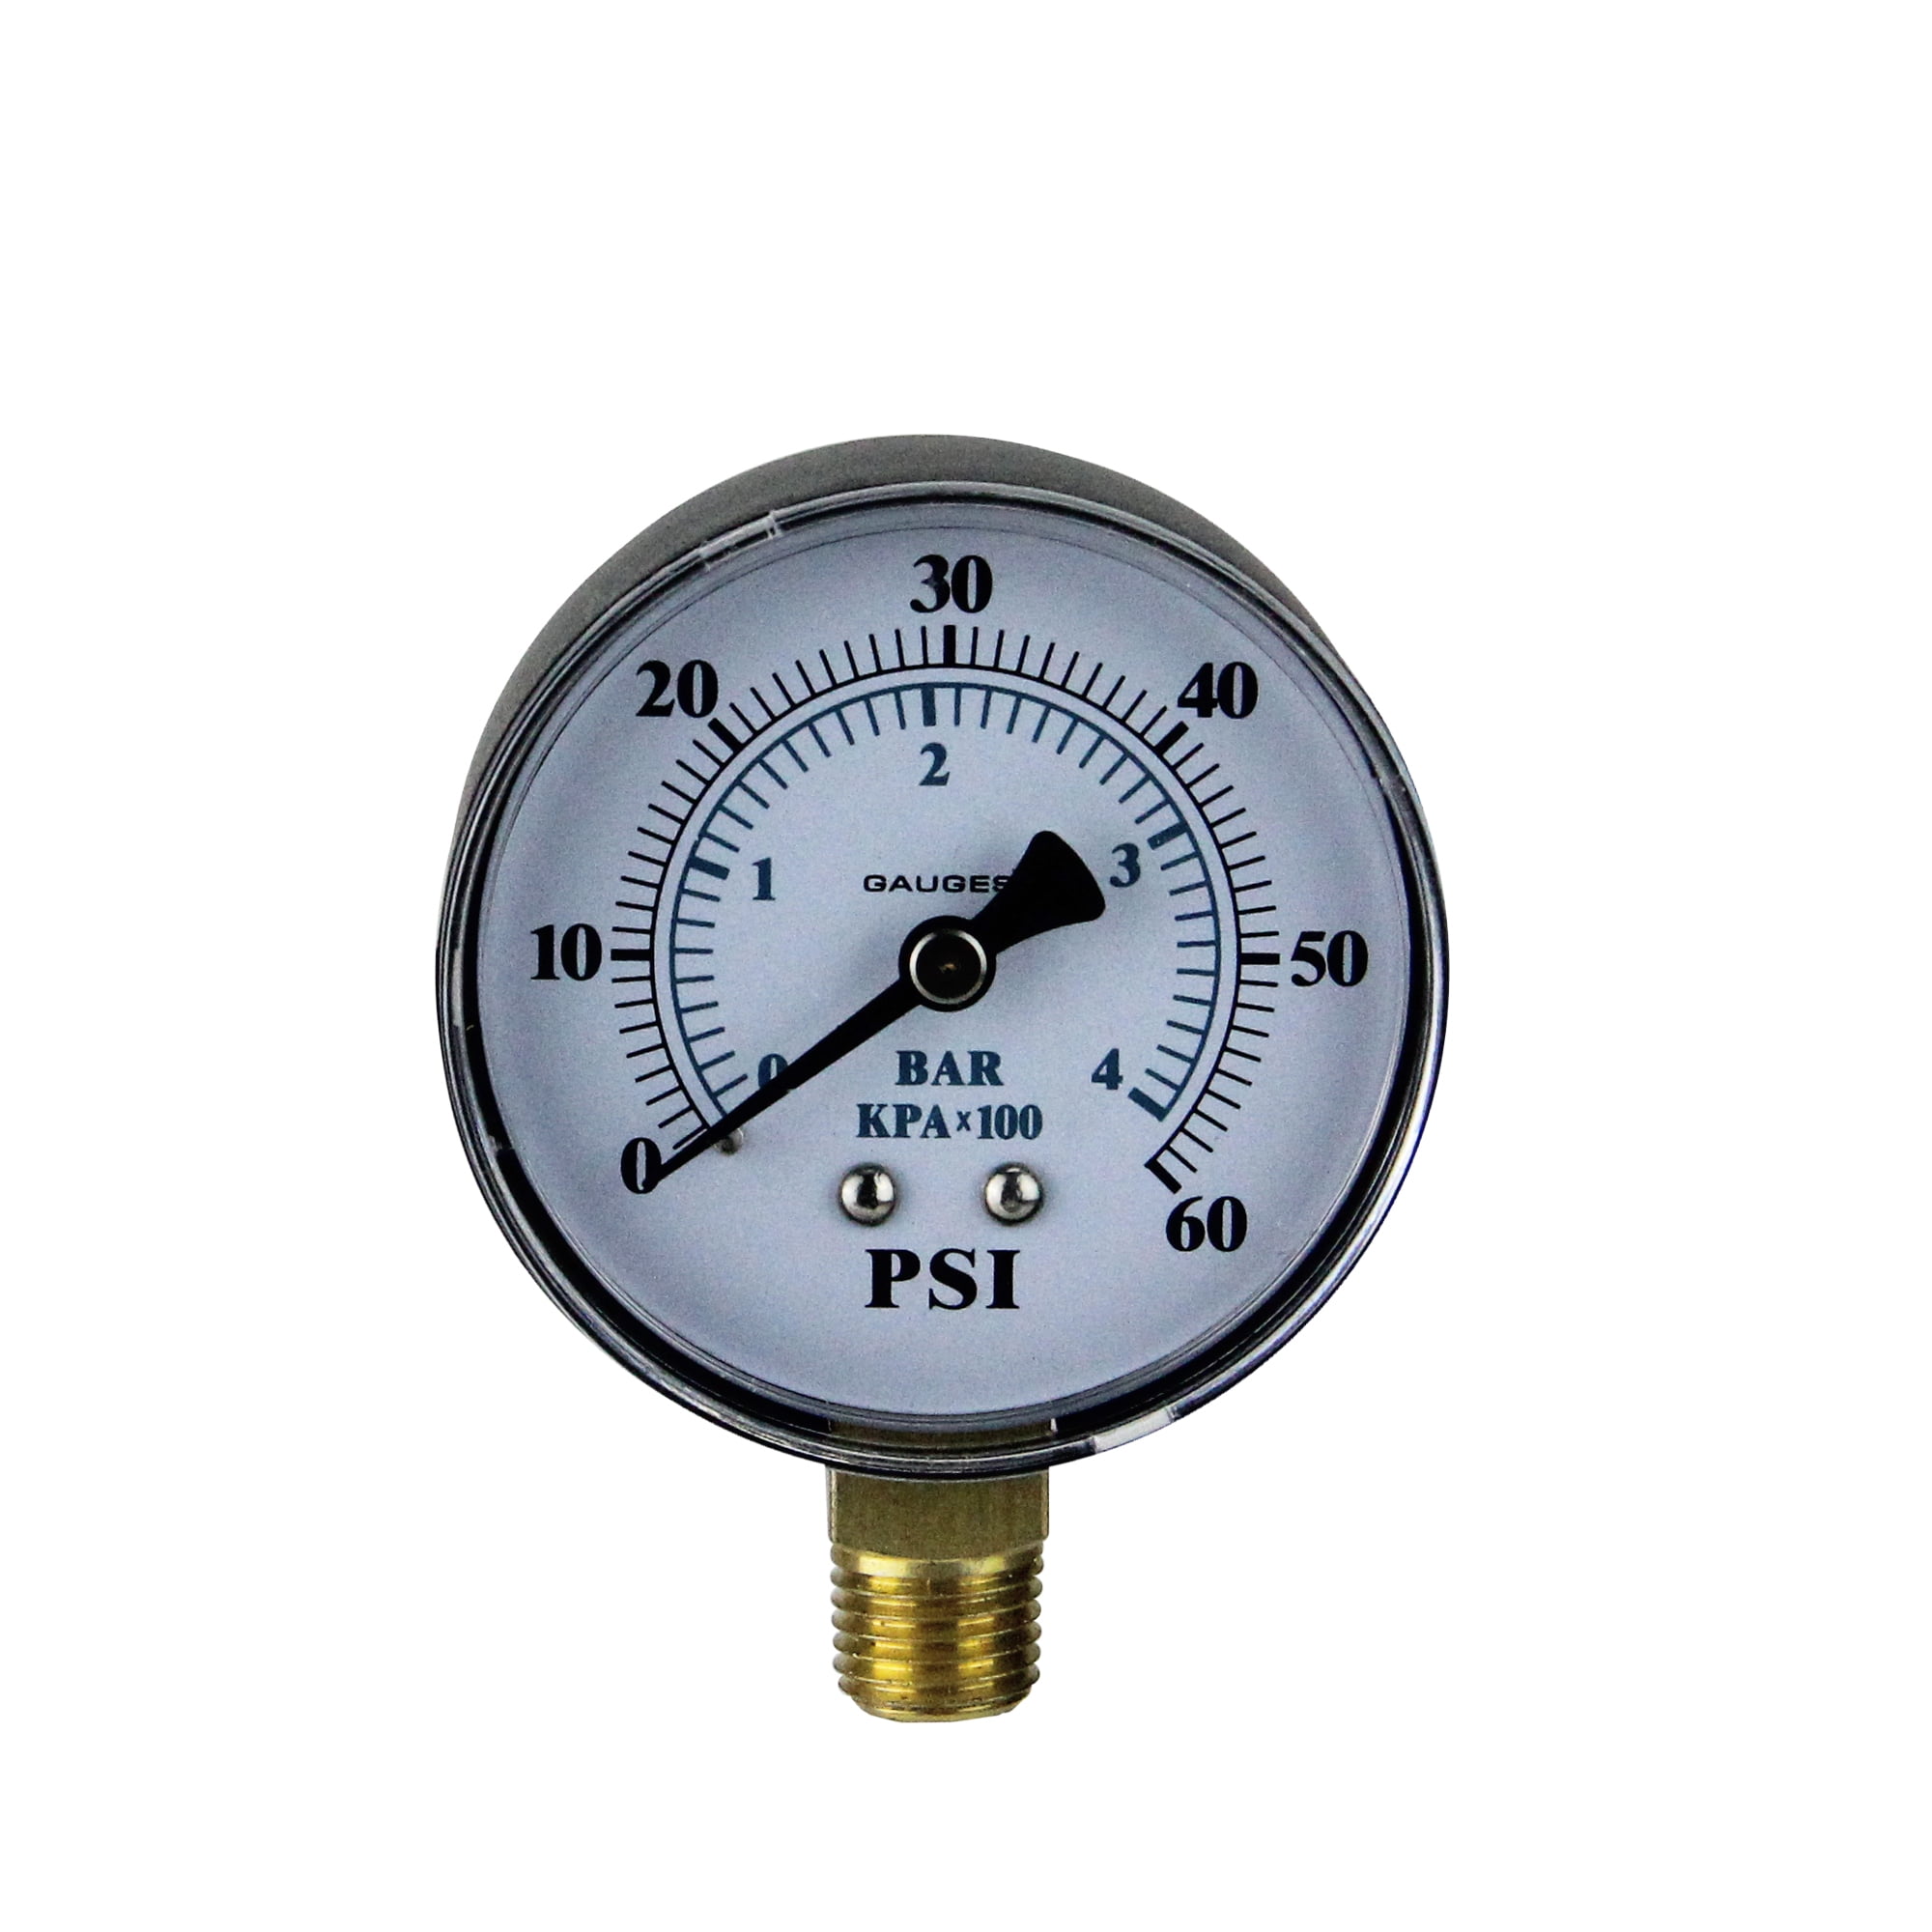 Details about   169782A PRESSURE GAUGE 0-60PSI 2" *NEW IN BOX* 